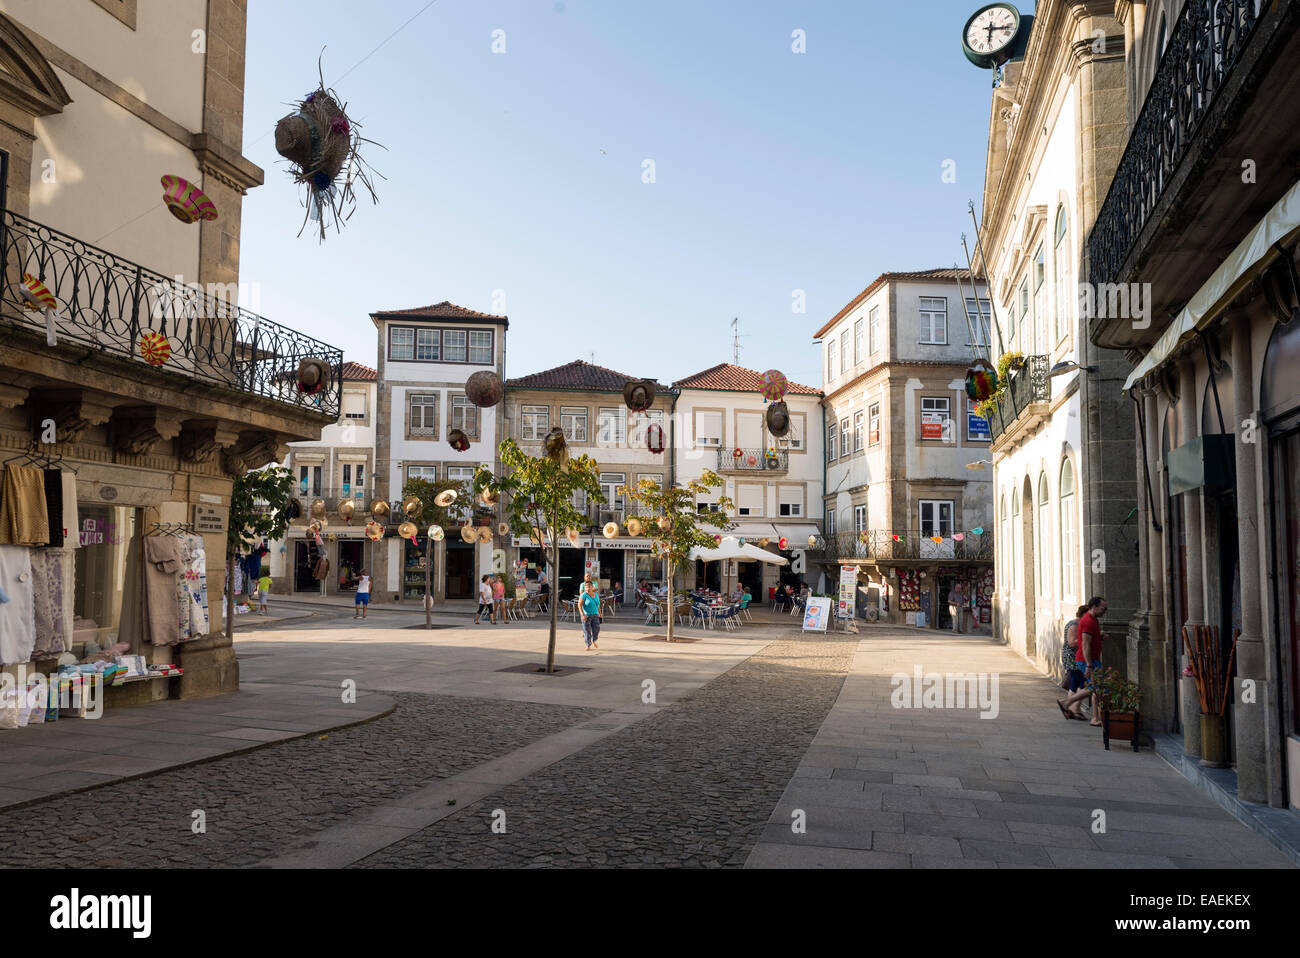 VALENÇA, PORTUGAL - SEPTEMBER 2, 2014: Shopping area in downtown. Portuguese Valença is a border town with Spain and specialized Stock Photo